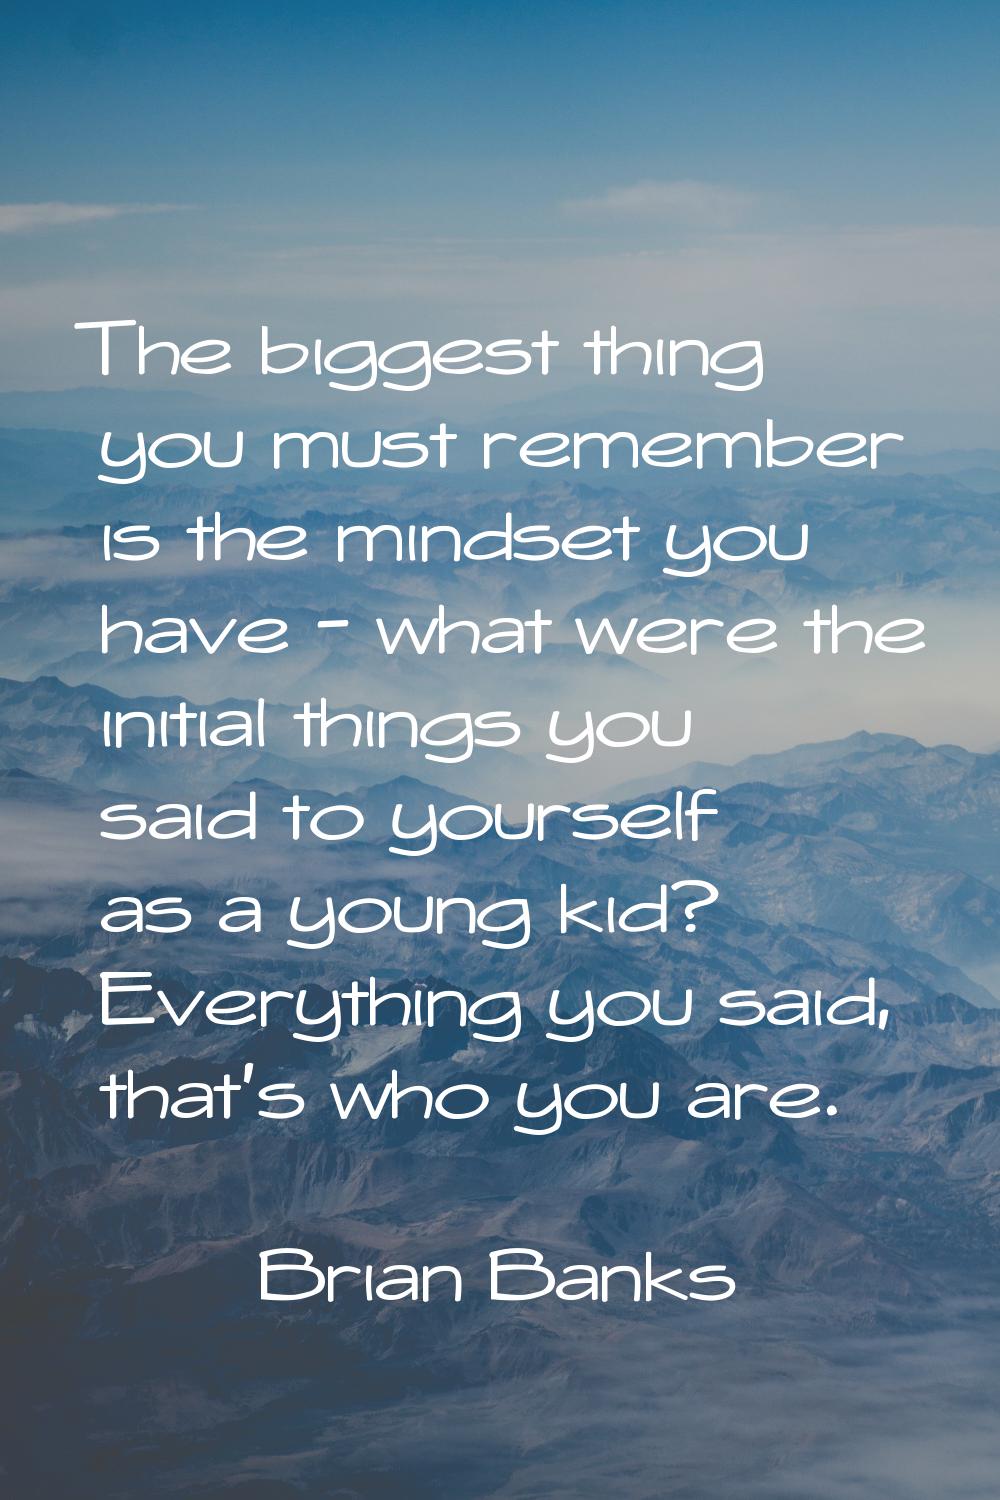 The biggest thing you must remember is the mindset you have - what were the initial things you said